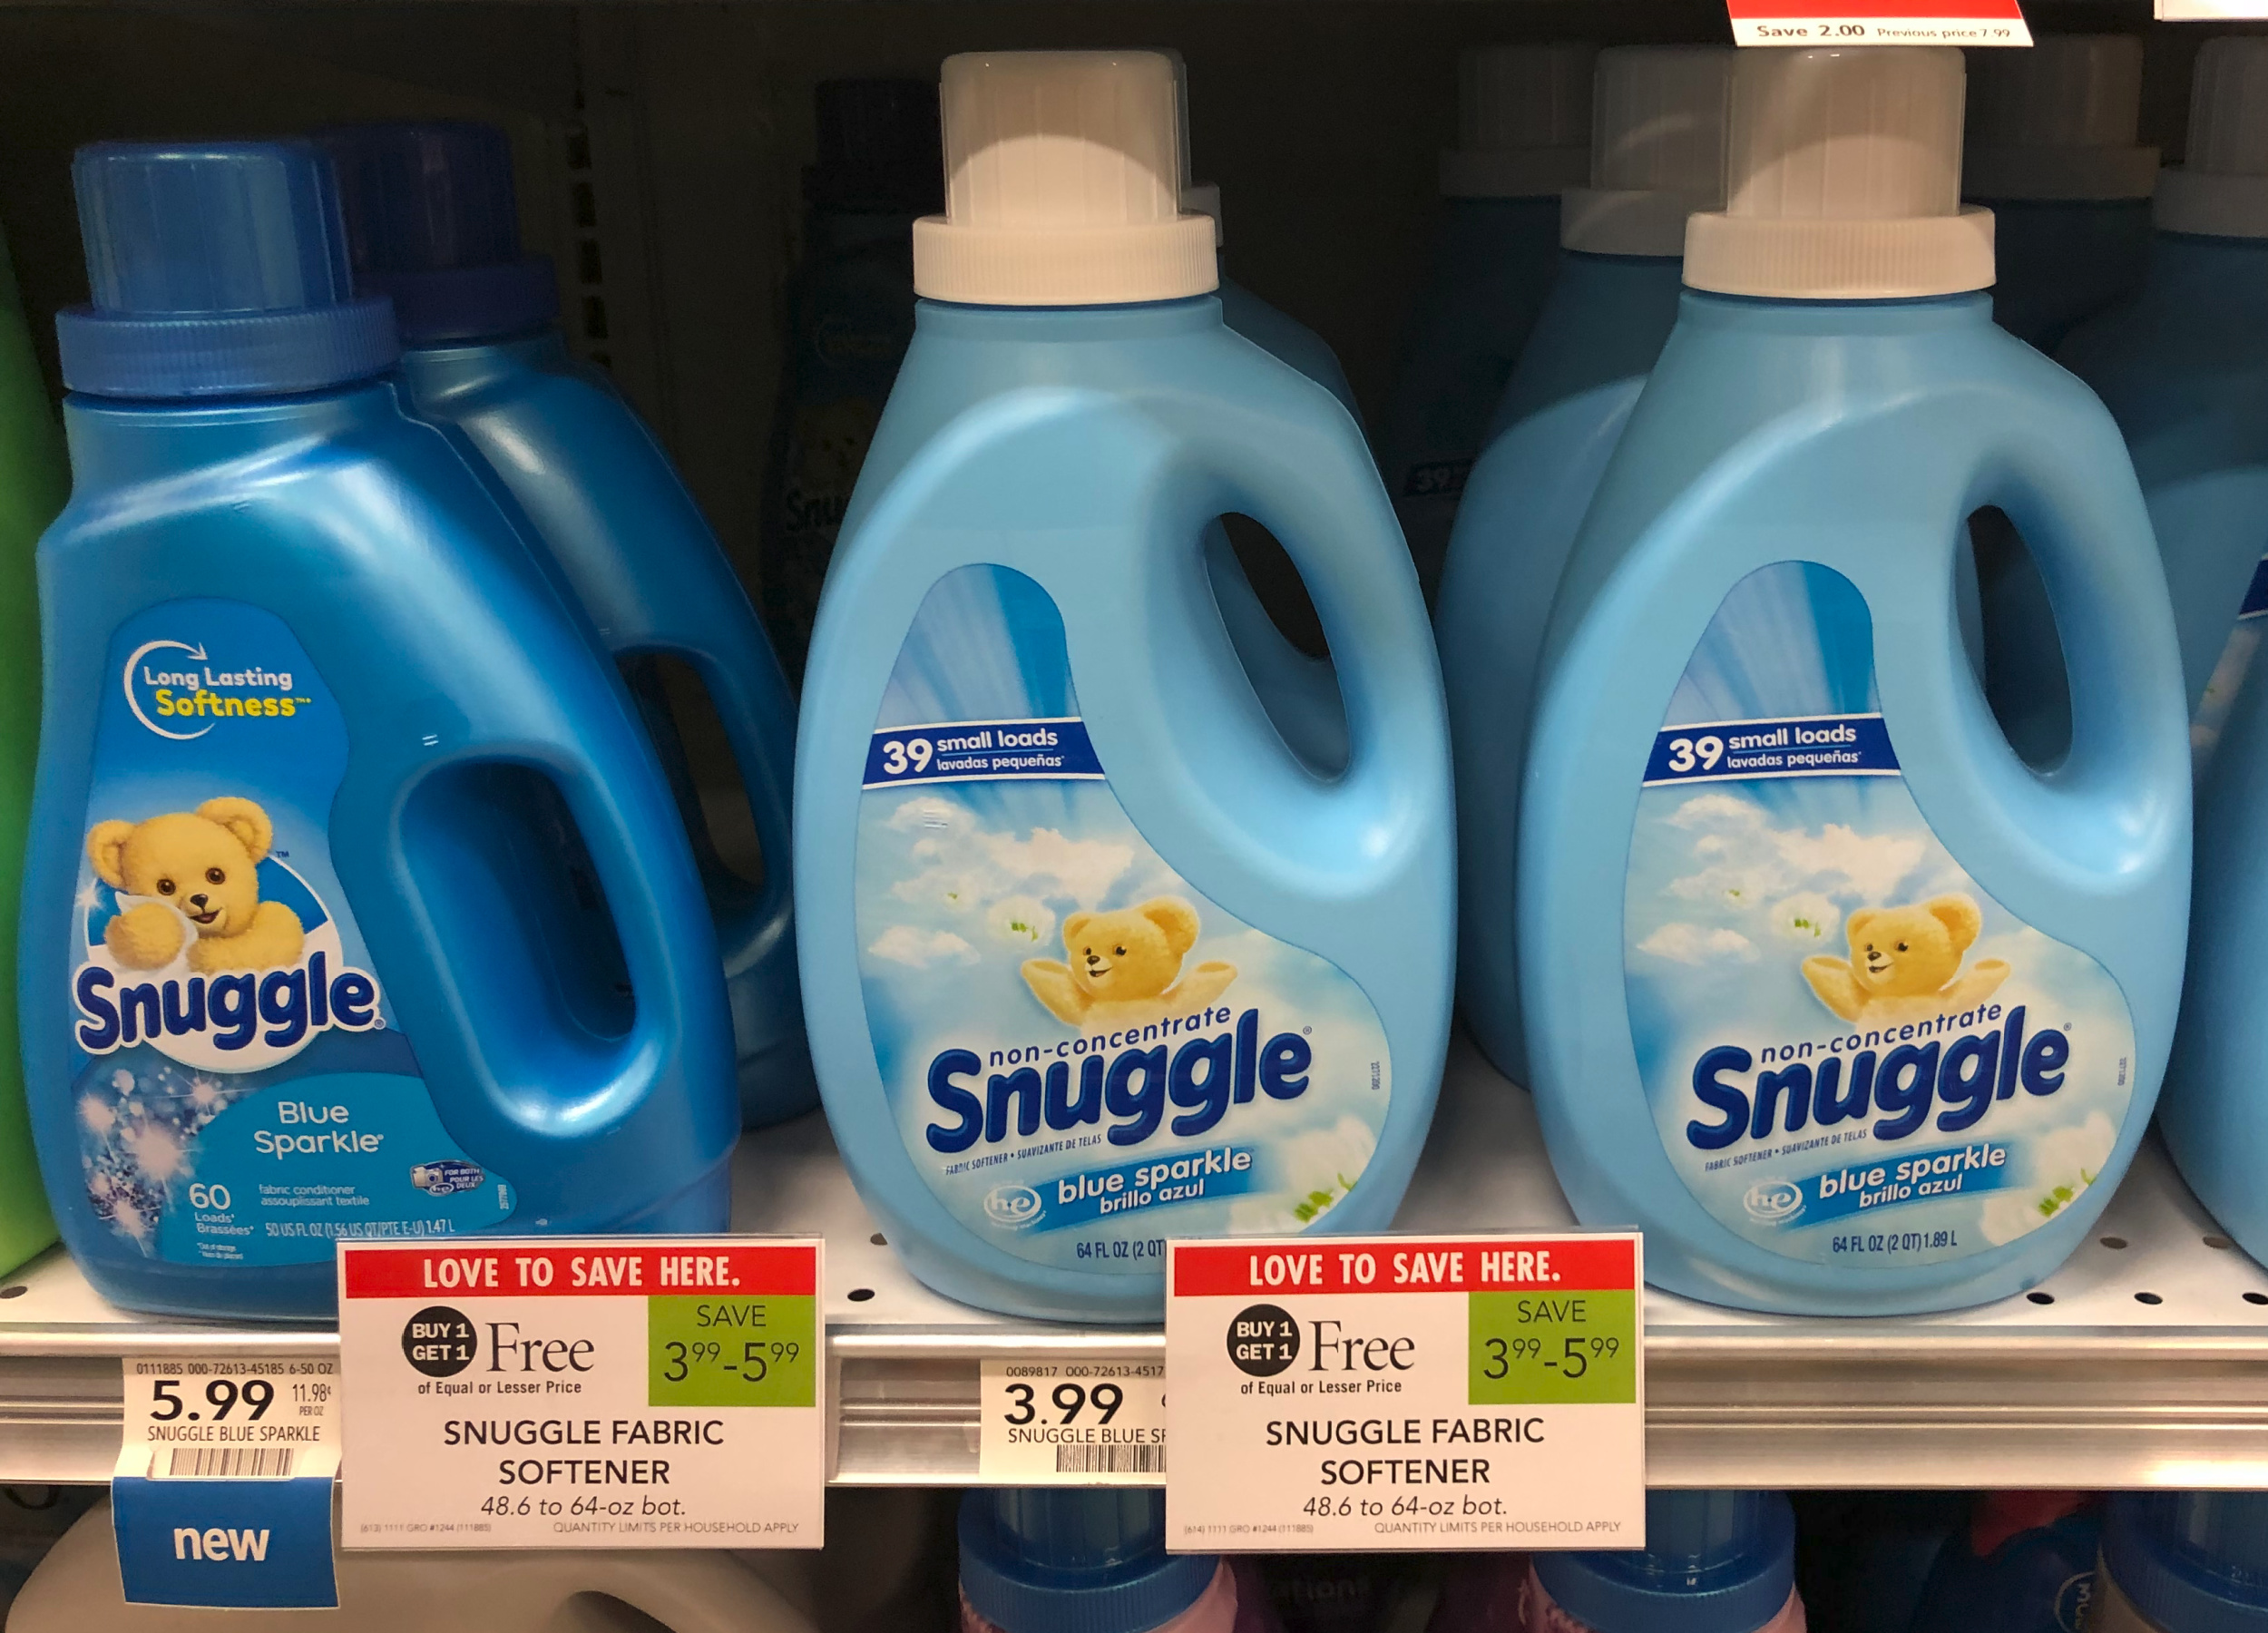 Snuggle Fabric Softener As Low As 50¢ At Publix on I Heart Publix